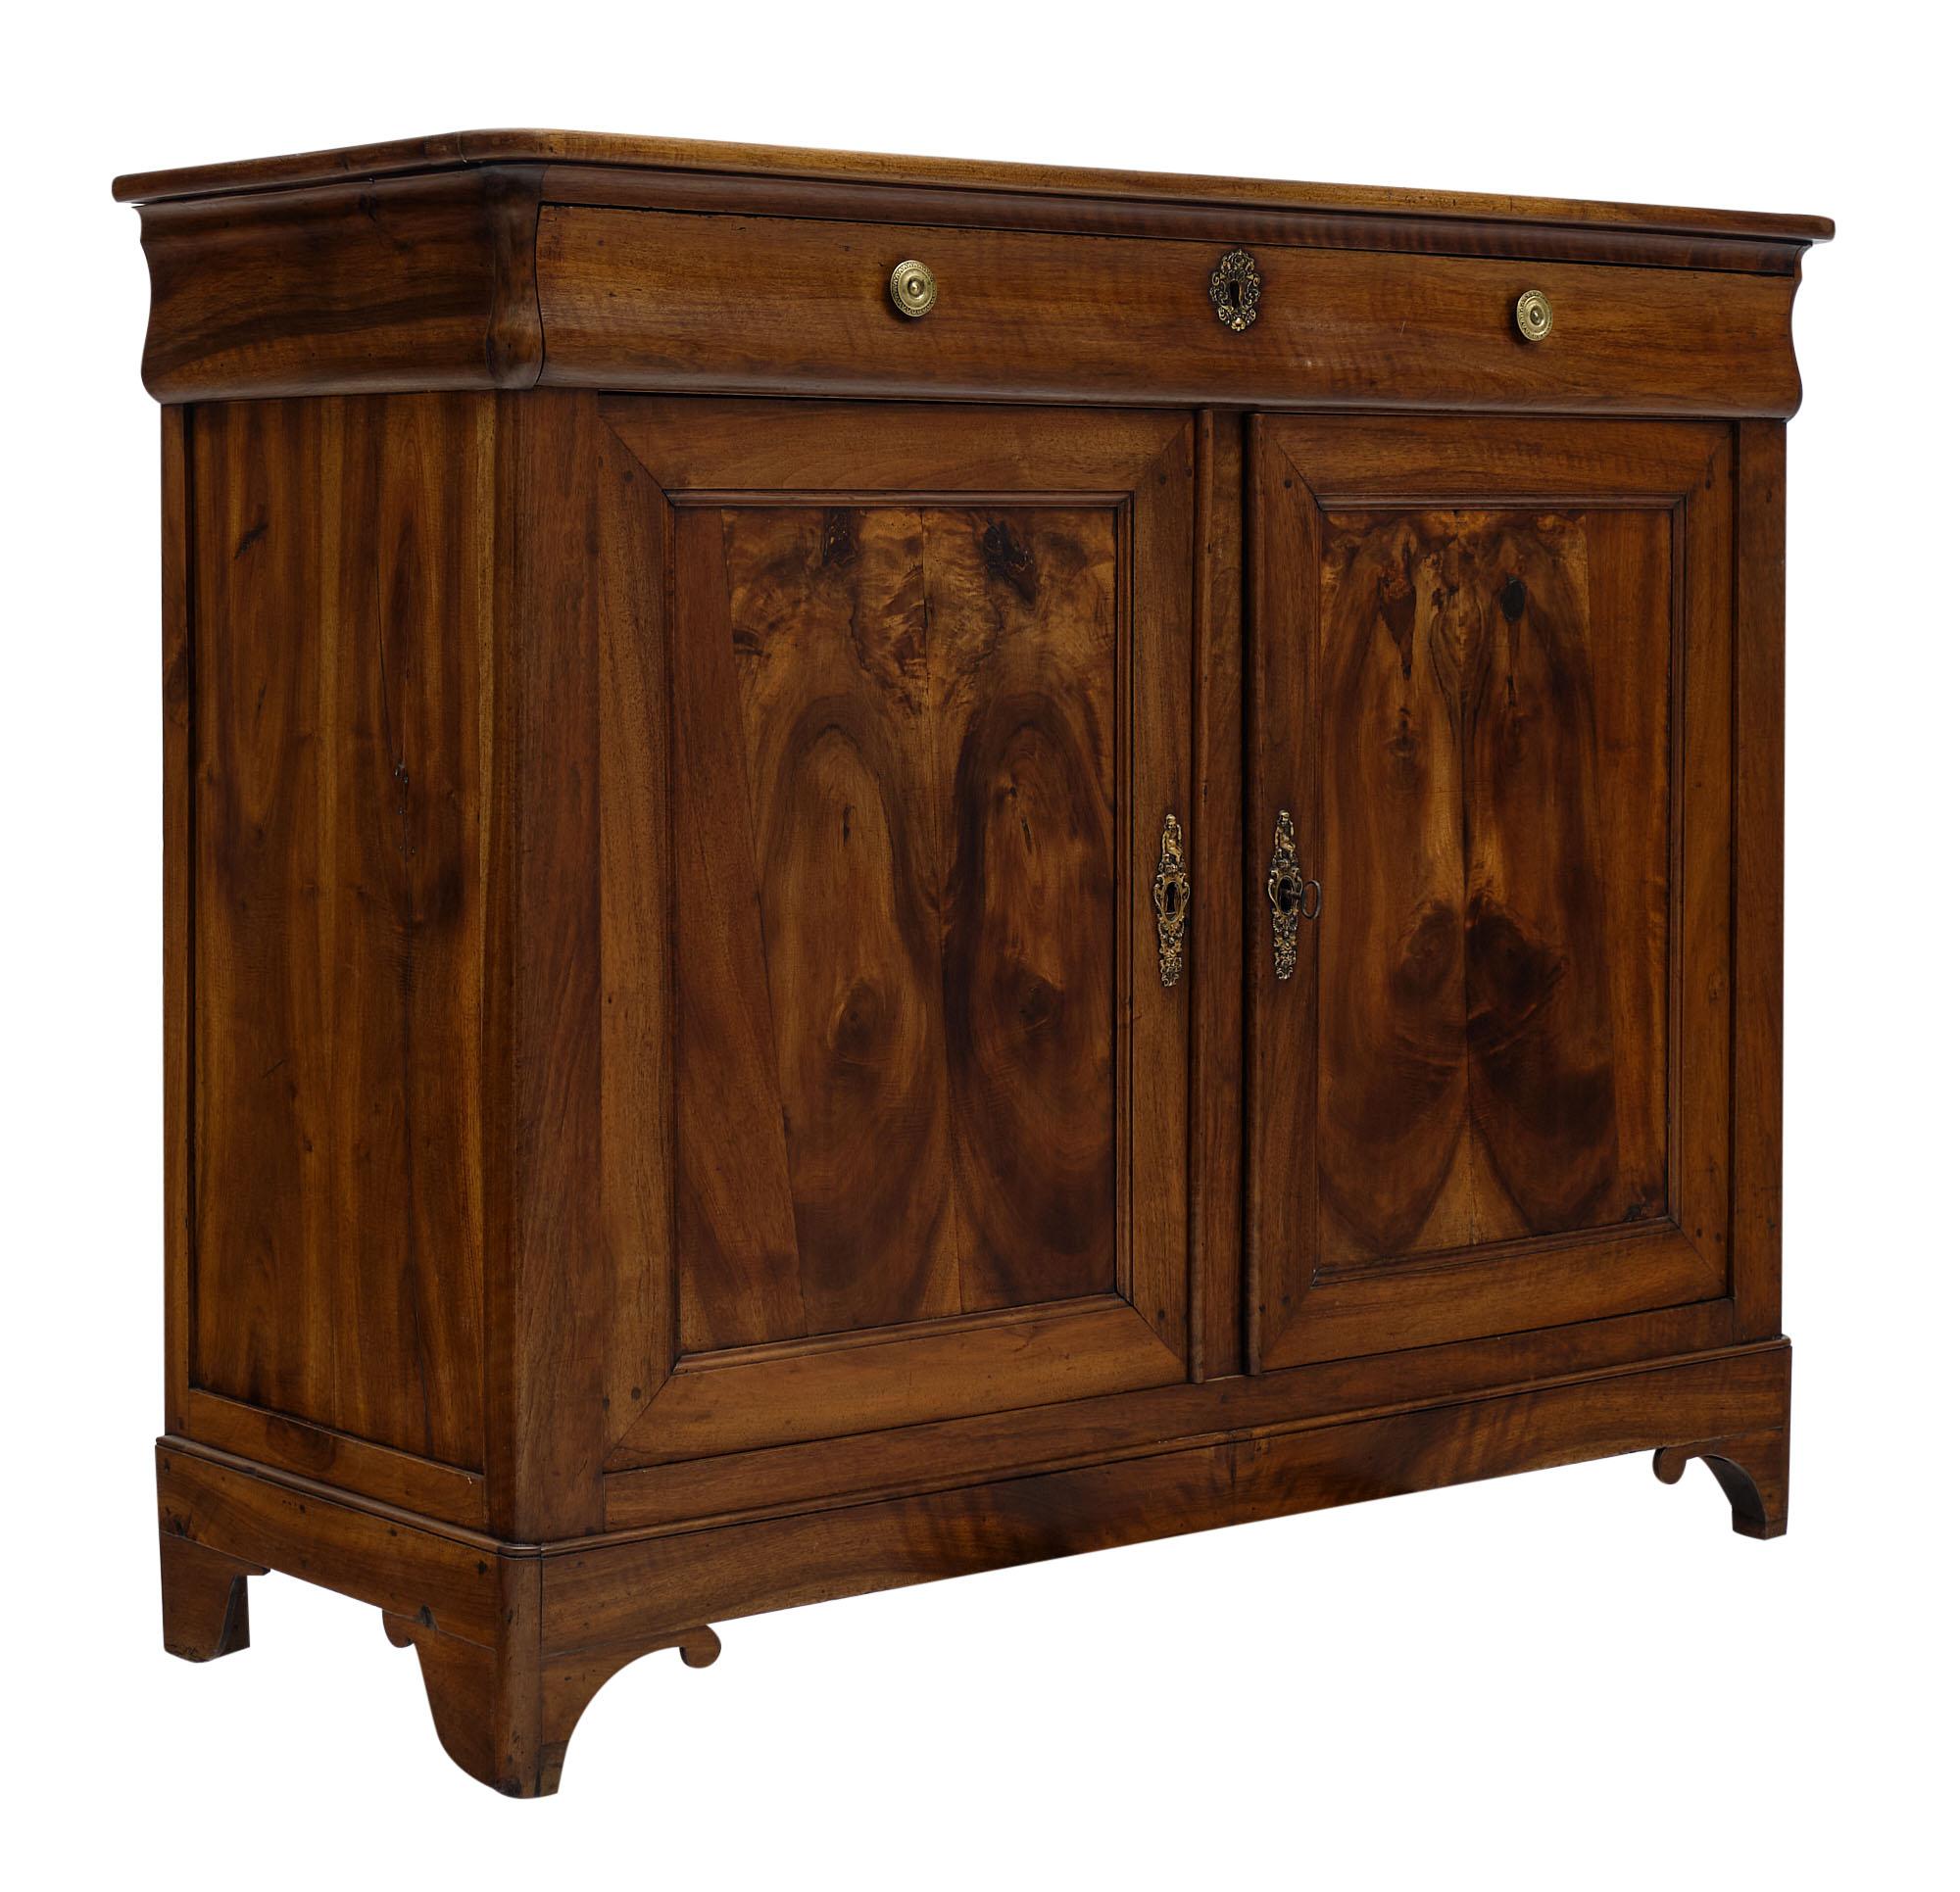 Buffet from France made of solid walnut and burled, figured walnut. There is one dovetailed drawer in the “doucine” apron, above two doors that open to reveal interior shelving. We love the beautiful wood and strong proportions.